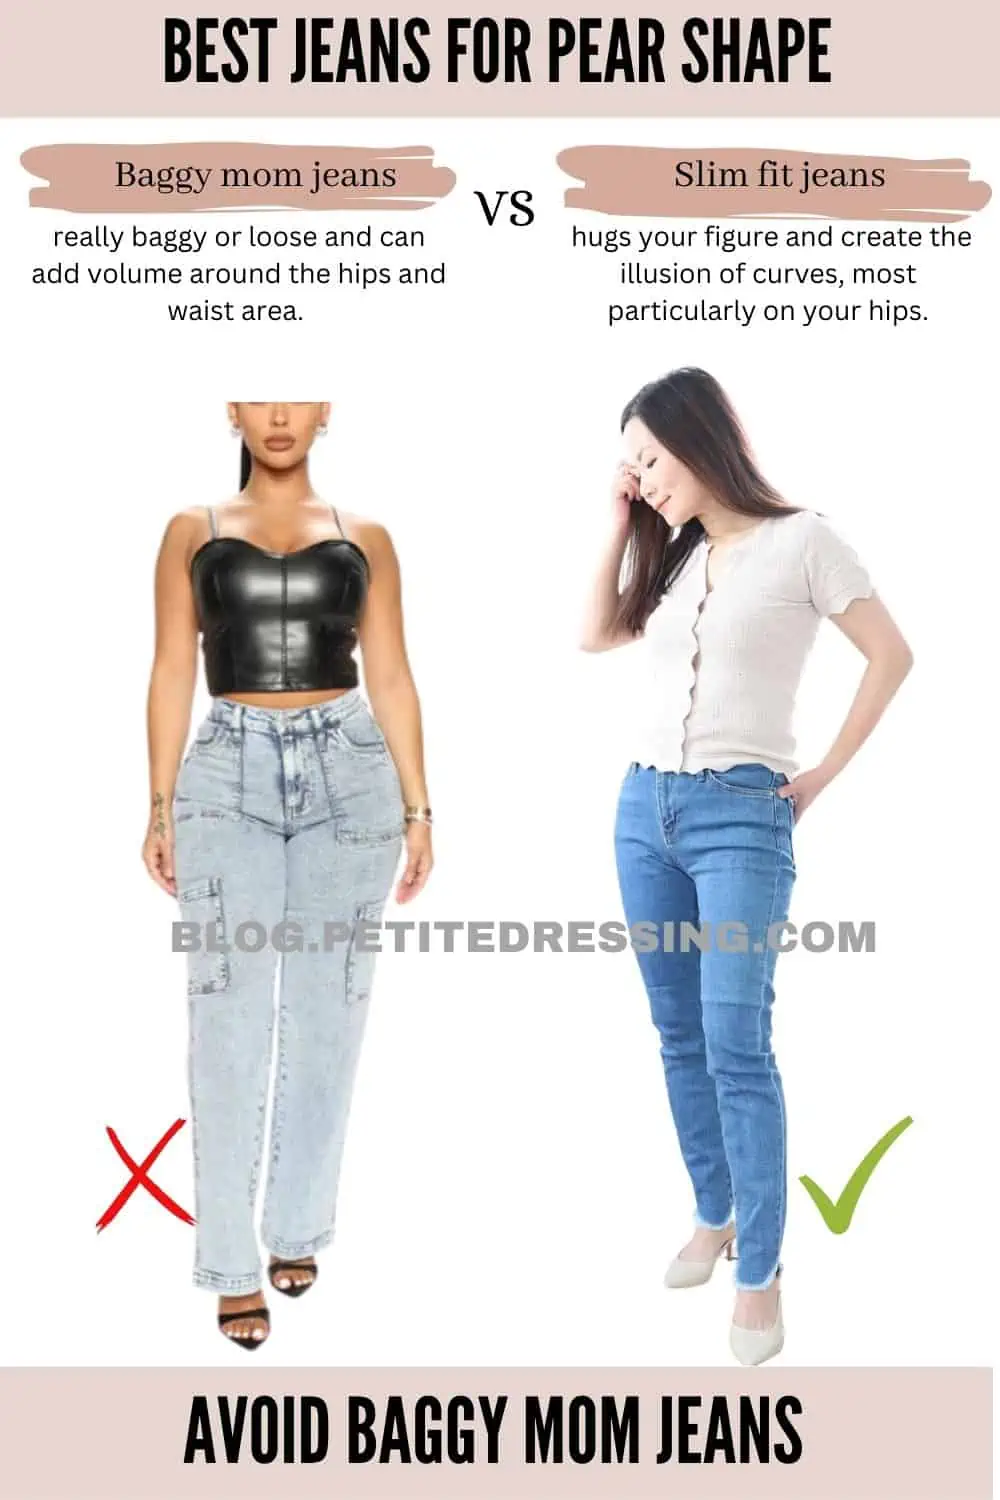 How to adapt a loose/casual style to a pear-shaped body? : r